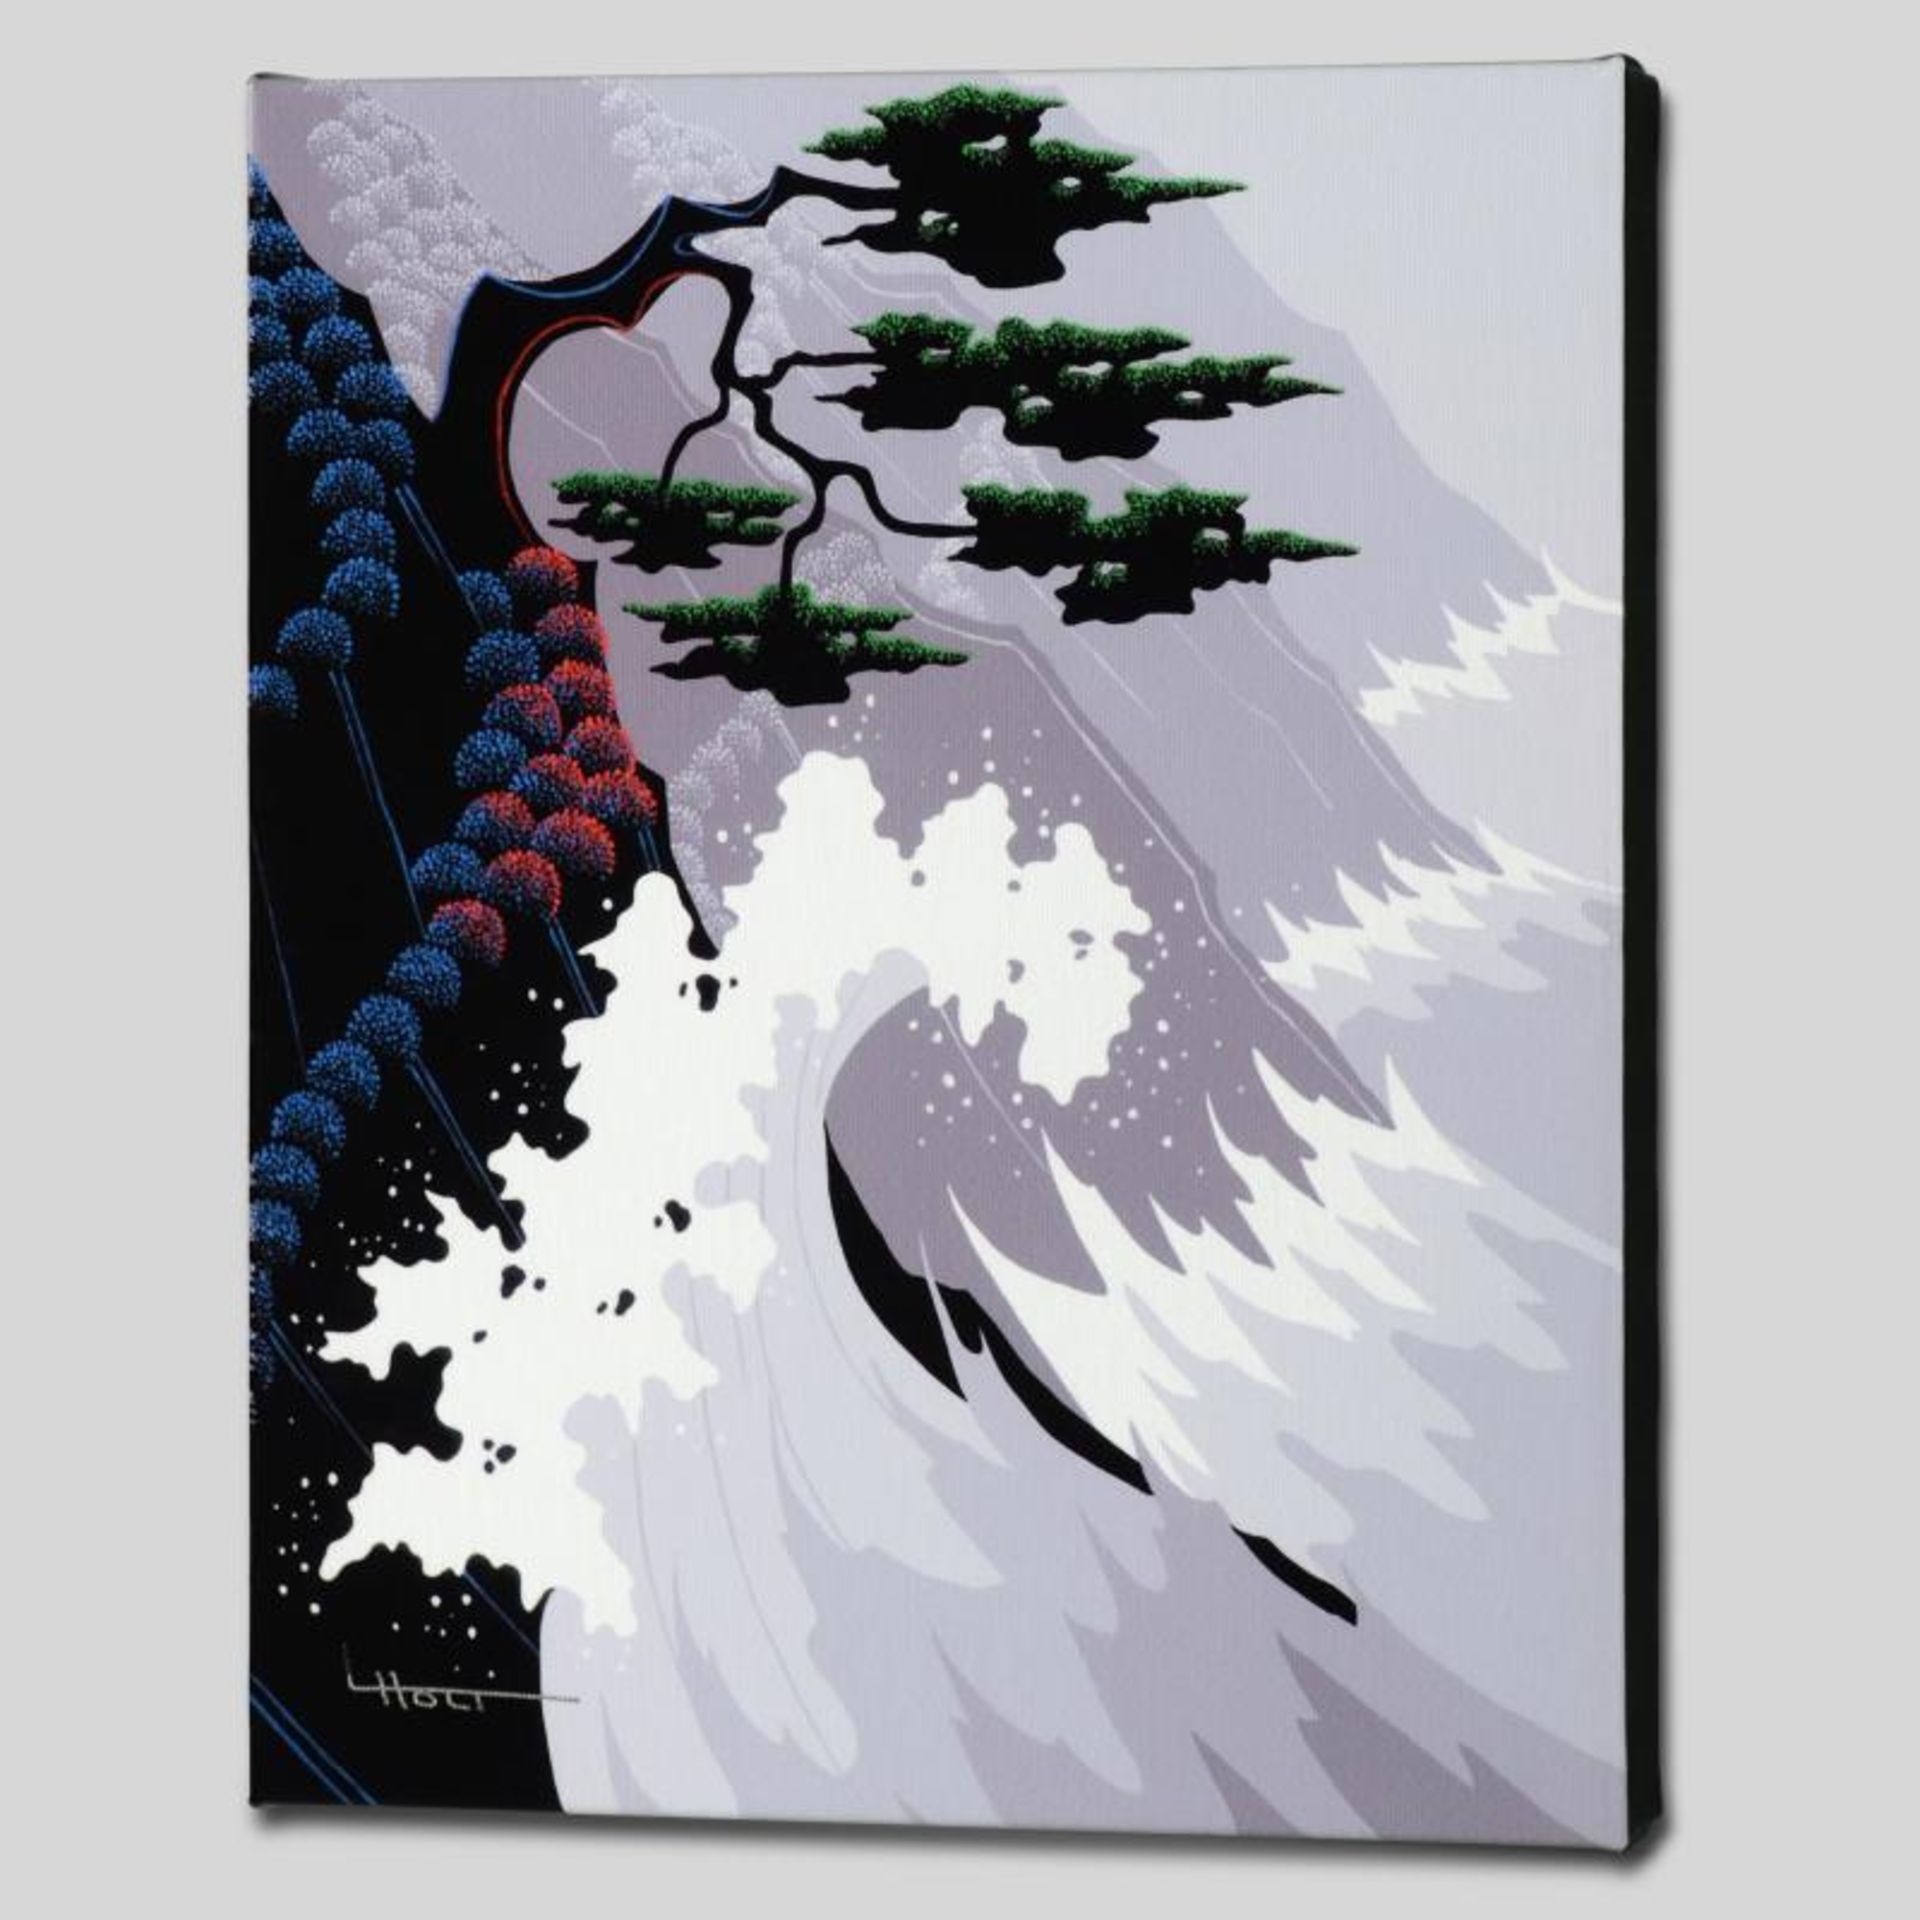 "Tsunami" Limited Edition Giclee on Canvas by Larissa Holt, Numbered and Signed. - Image 2 of 2